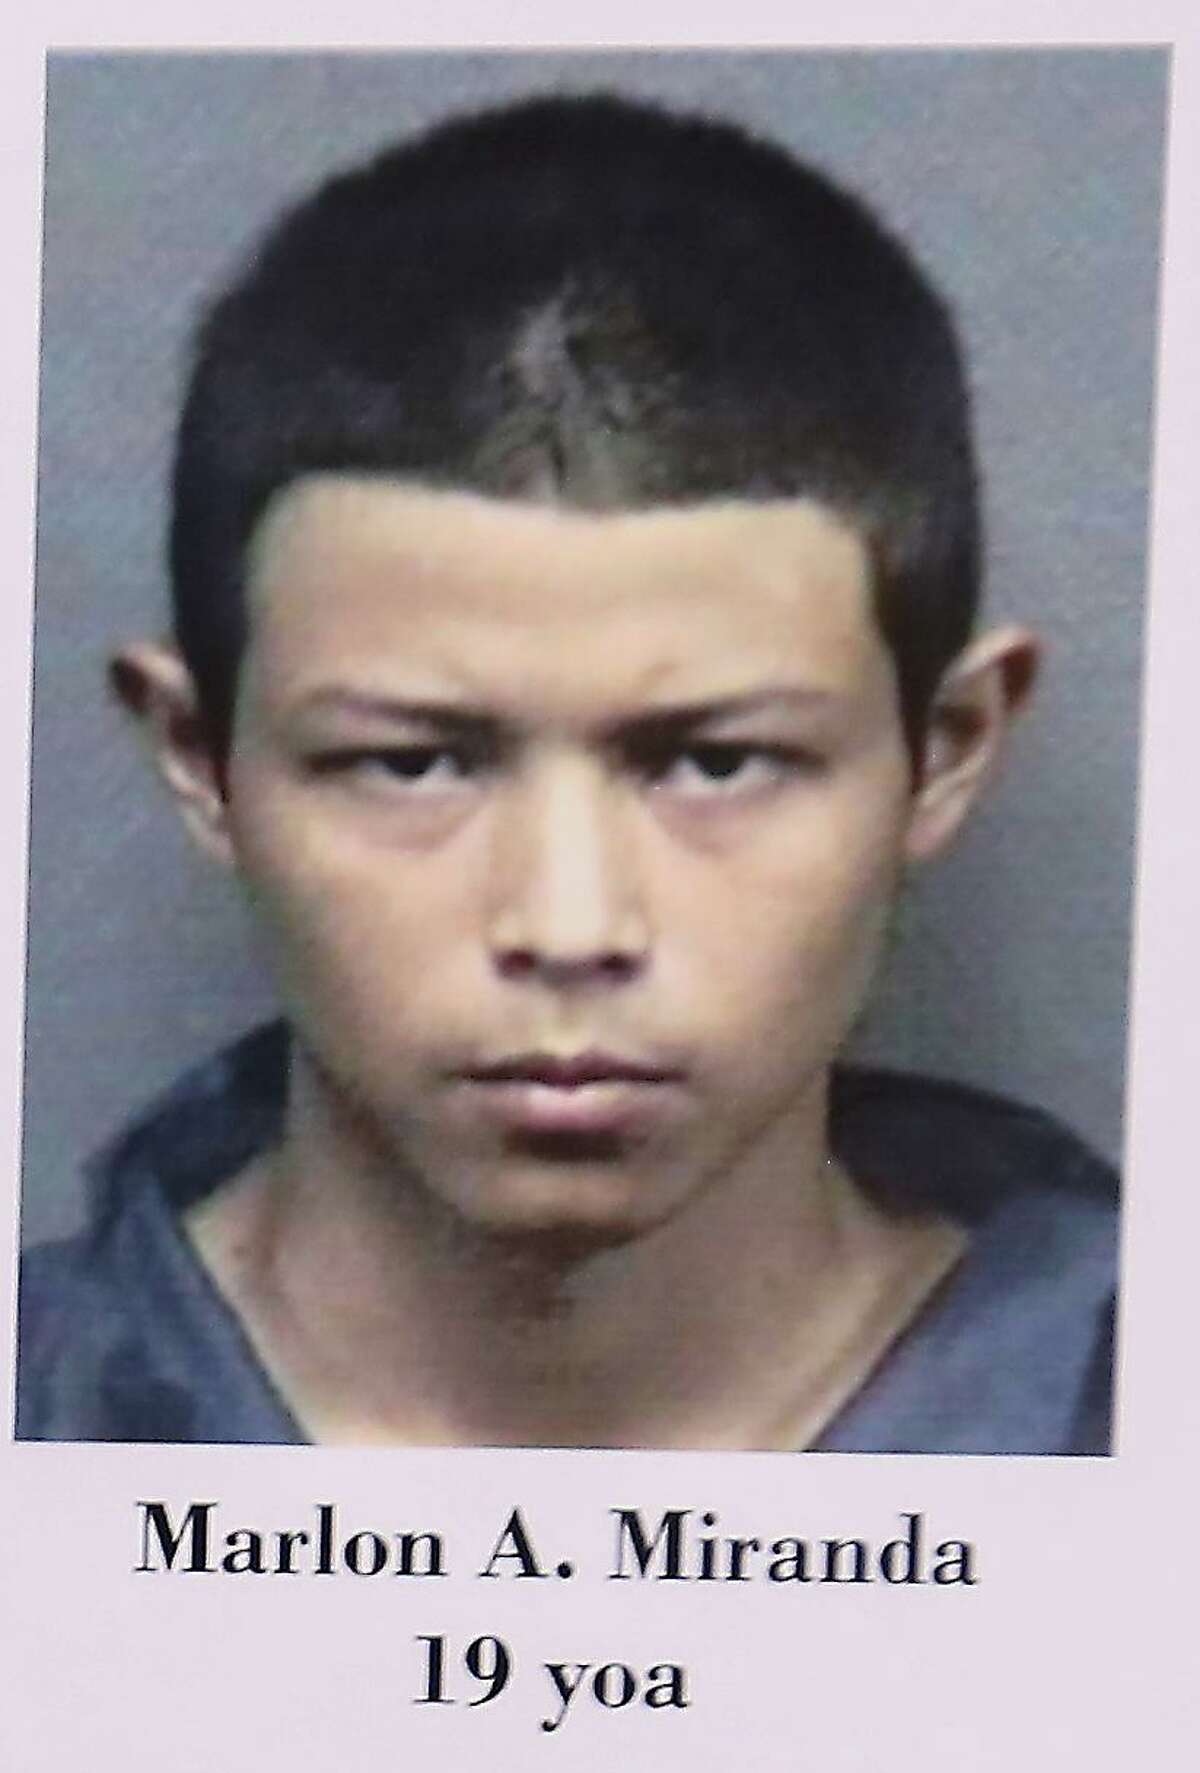 The arrest of MS-13 gang member Marlon A. Miranda was announced Sept. 4, 2018, in Houston.